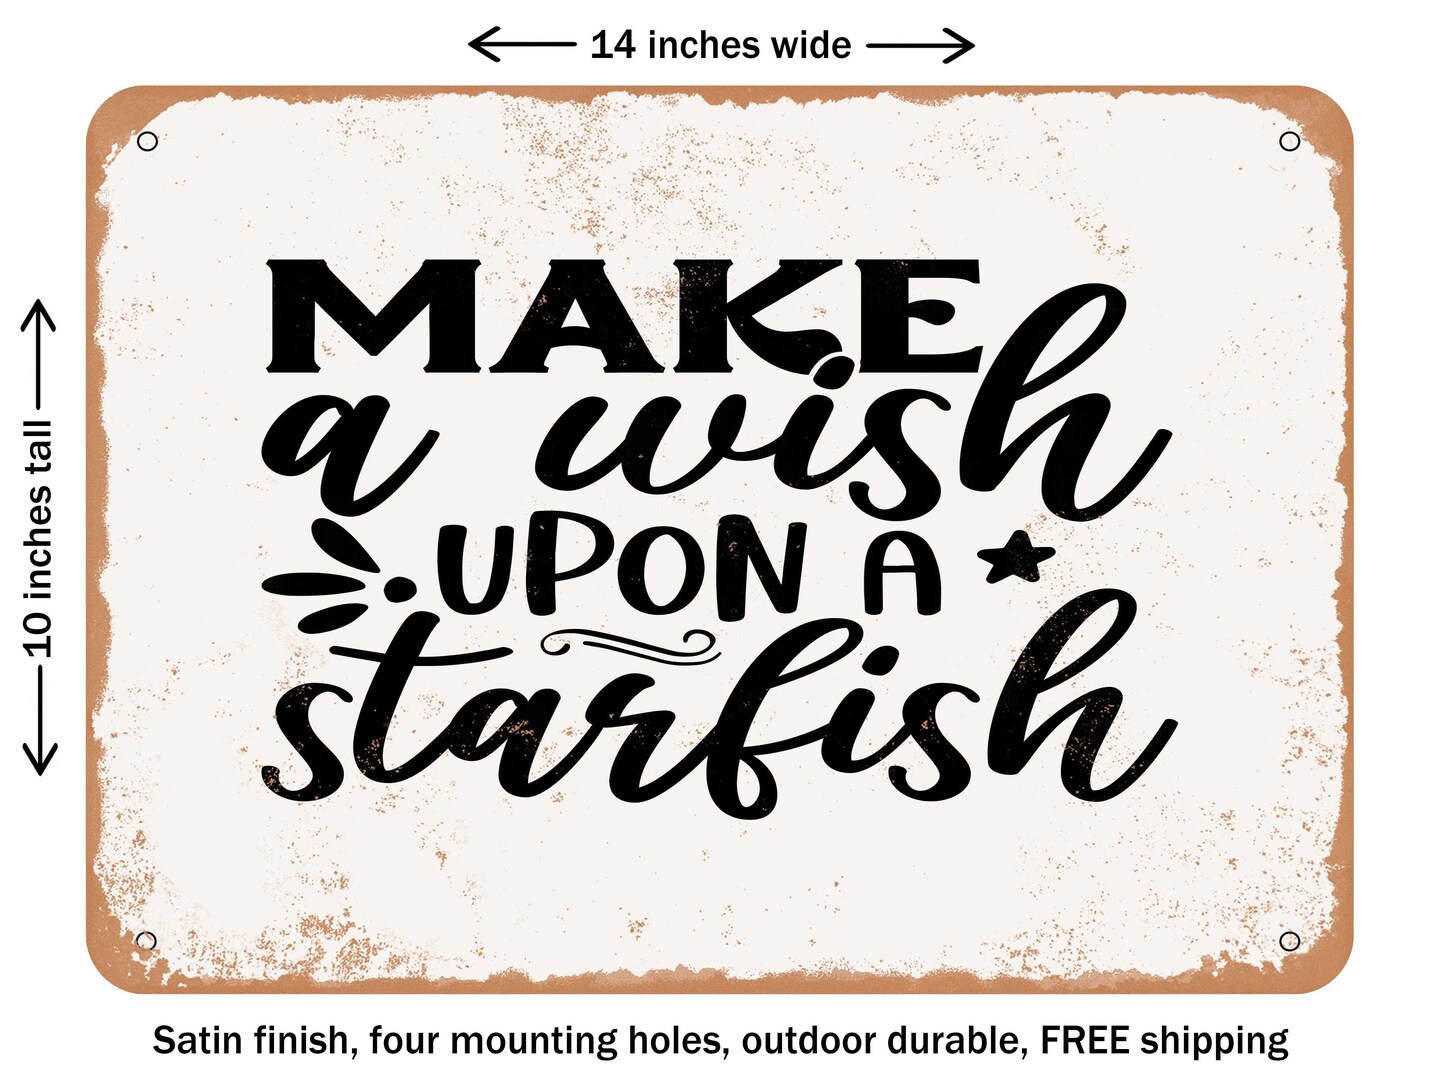 DECORATIVE METAL SIGN - Make a Wish Upon a Starfish - 2 - Vintage Rusty Look